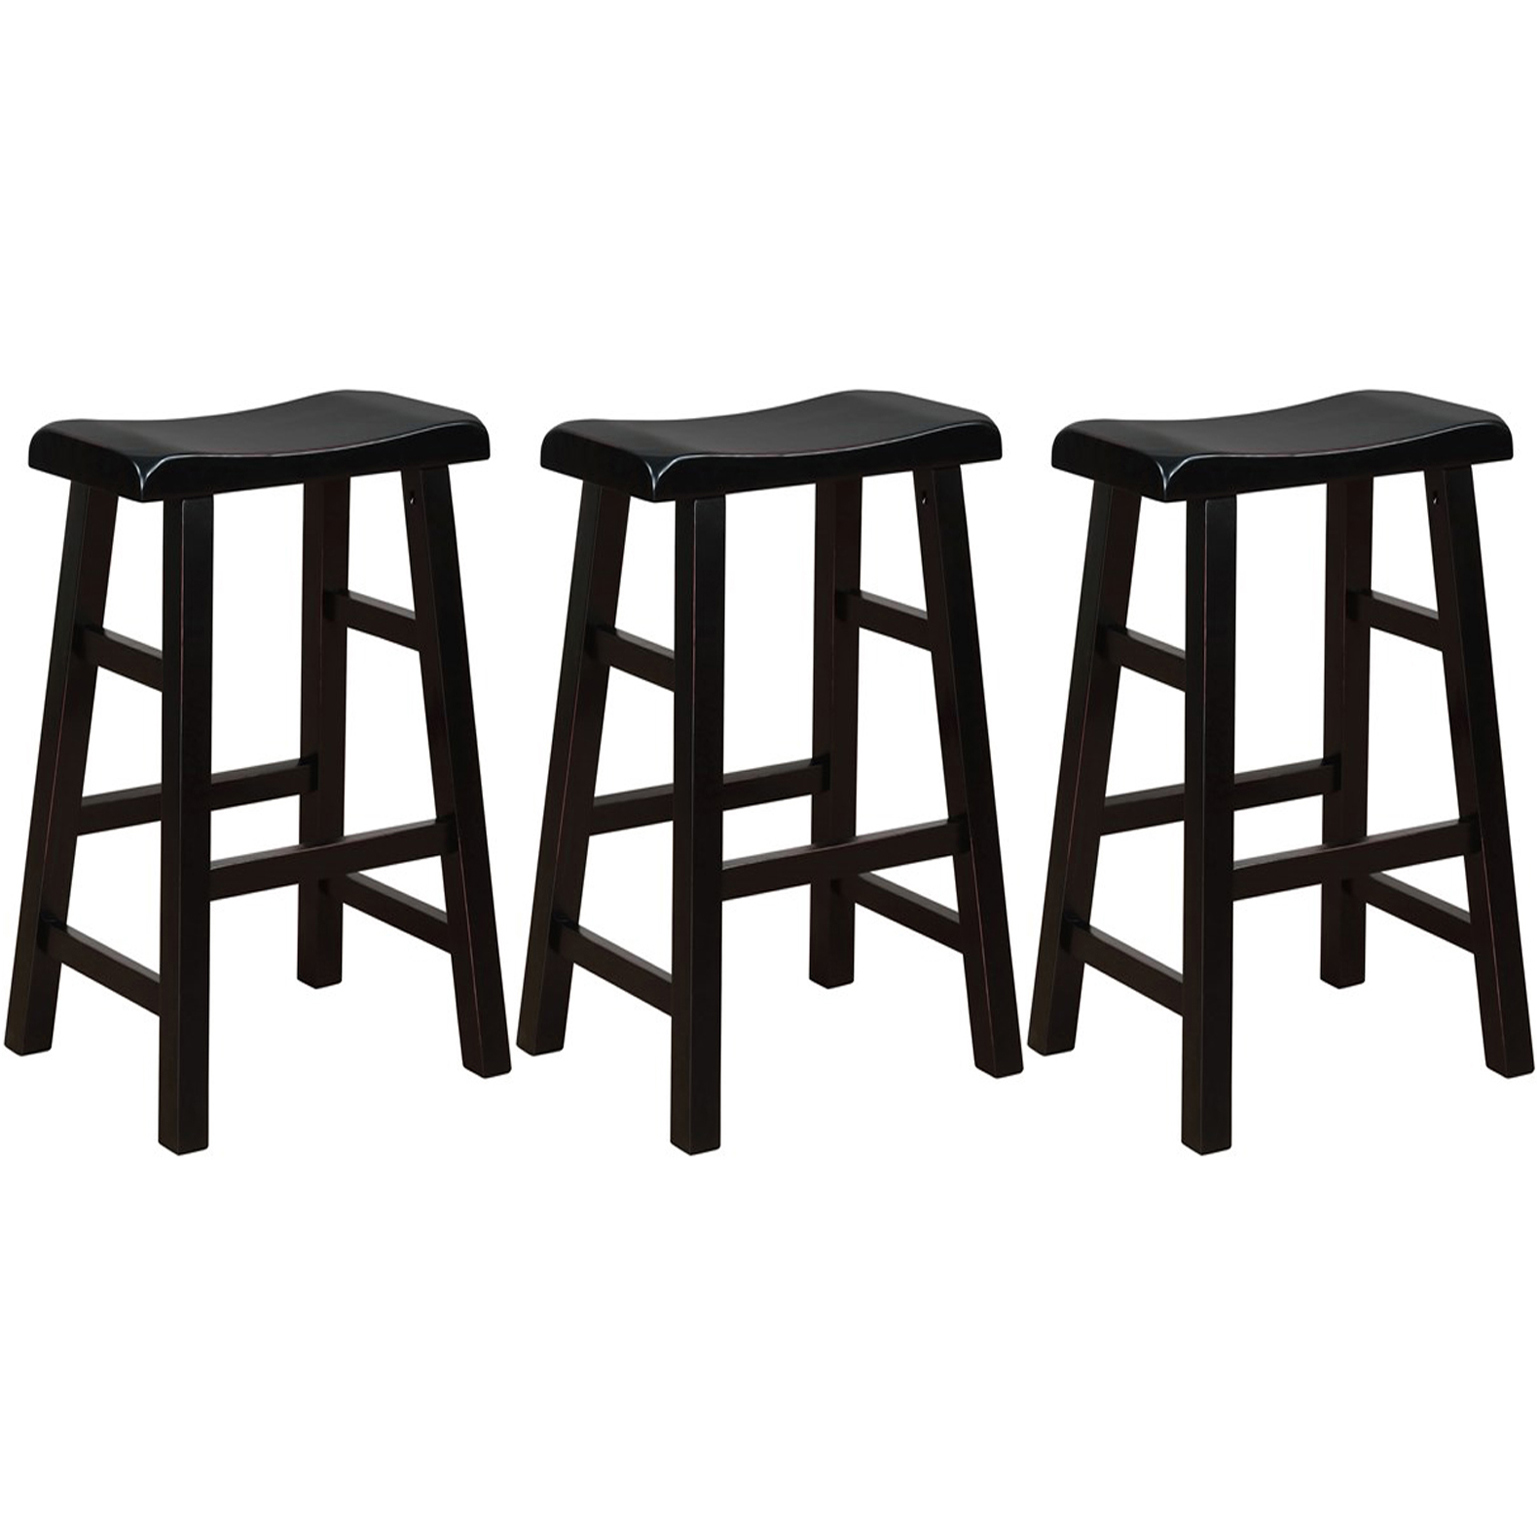 eHemco Heavy-Duty Solid Wood Saddle Seat Kitchen Counter Barstools, 29 Inches, Antique Black with Red Edging, Set of 3 - image 1 of 7